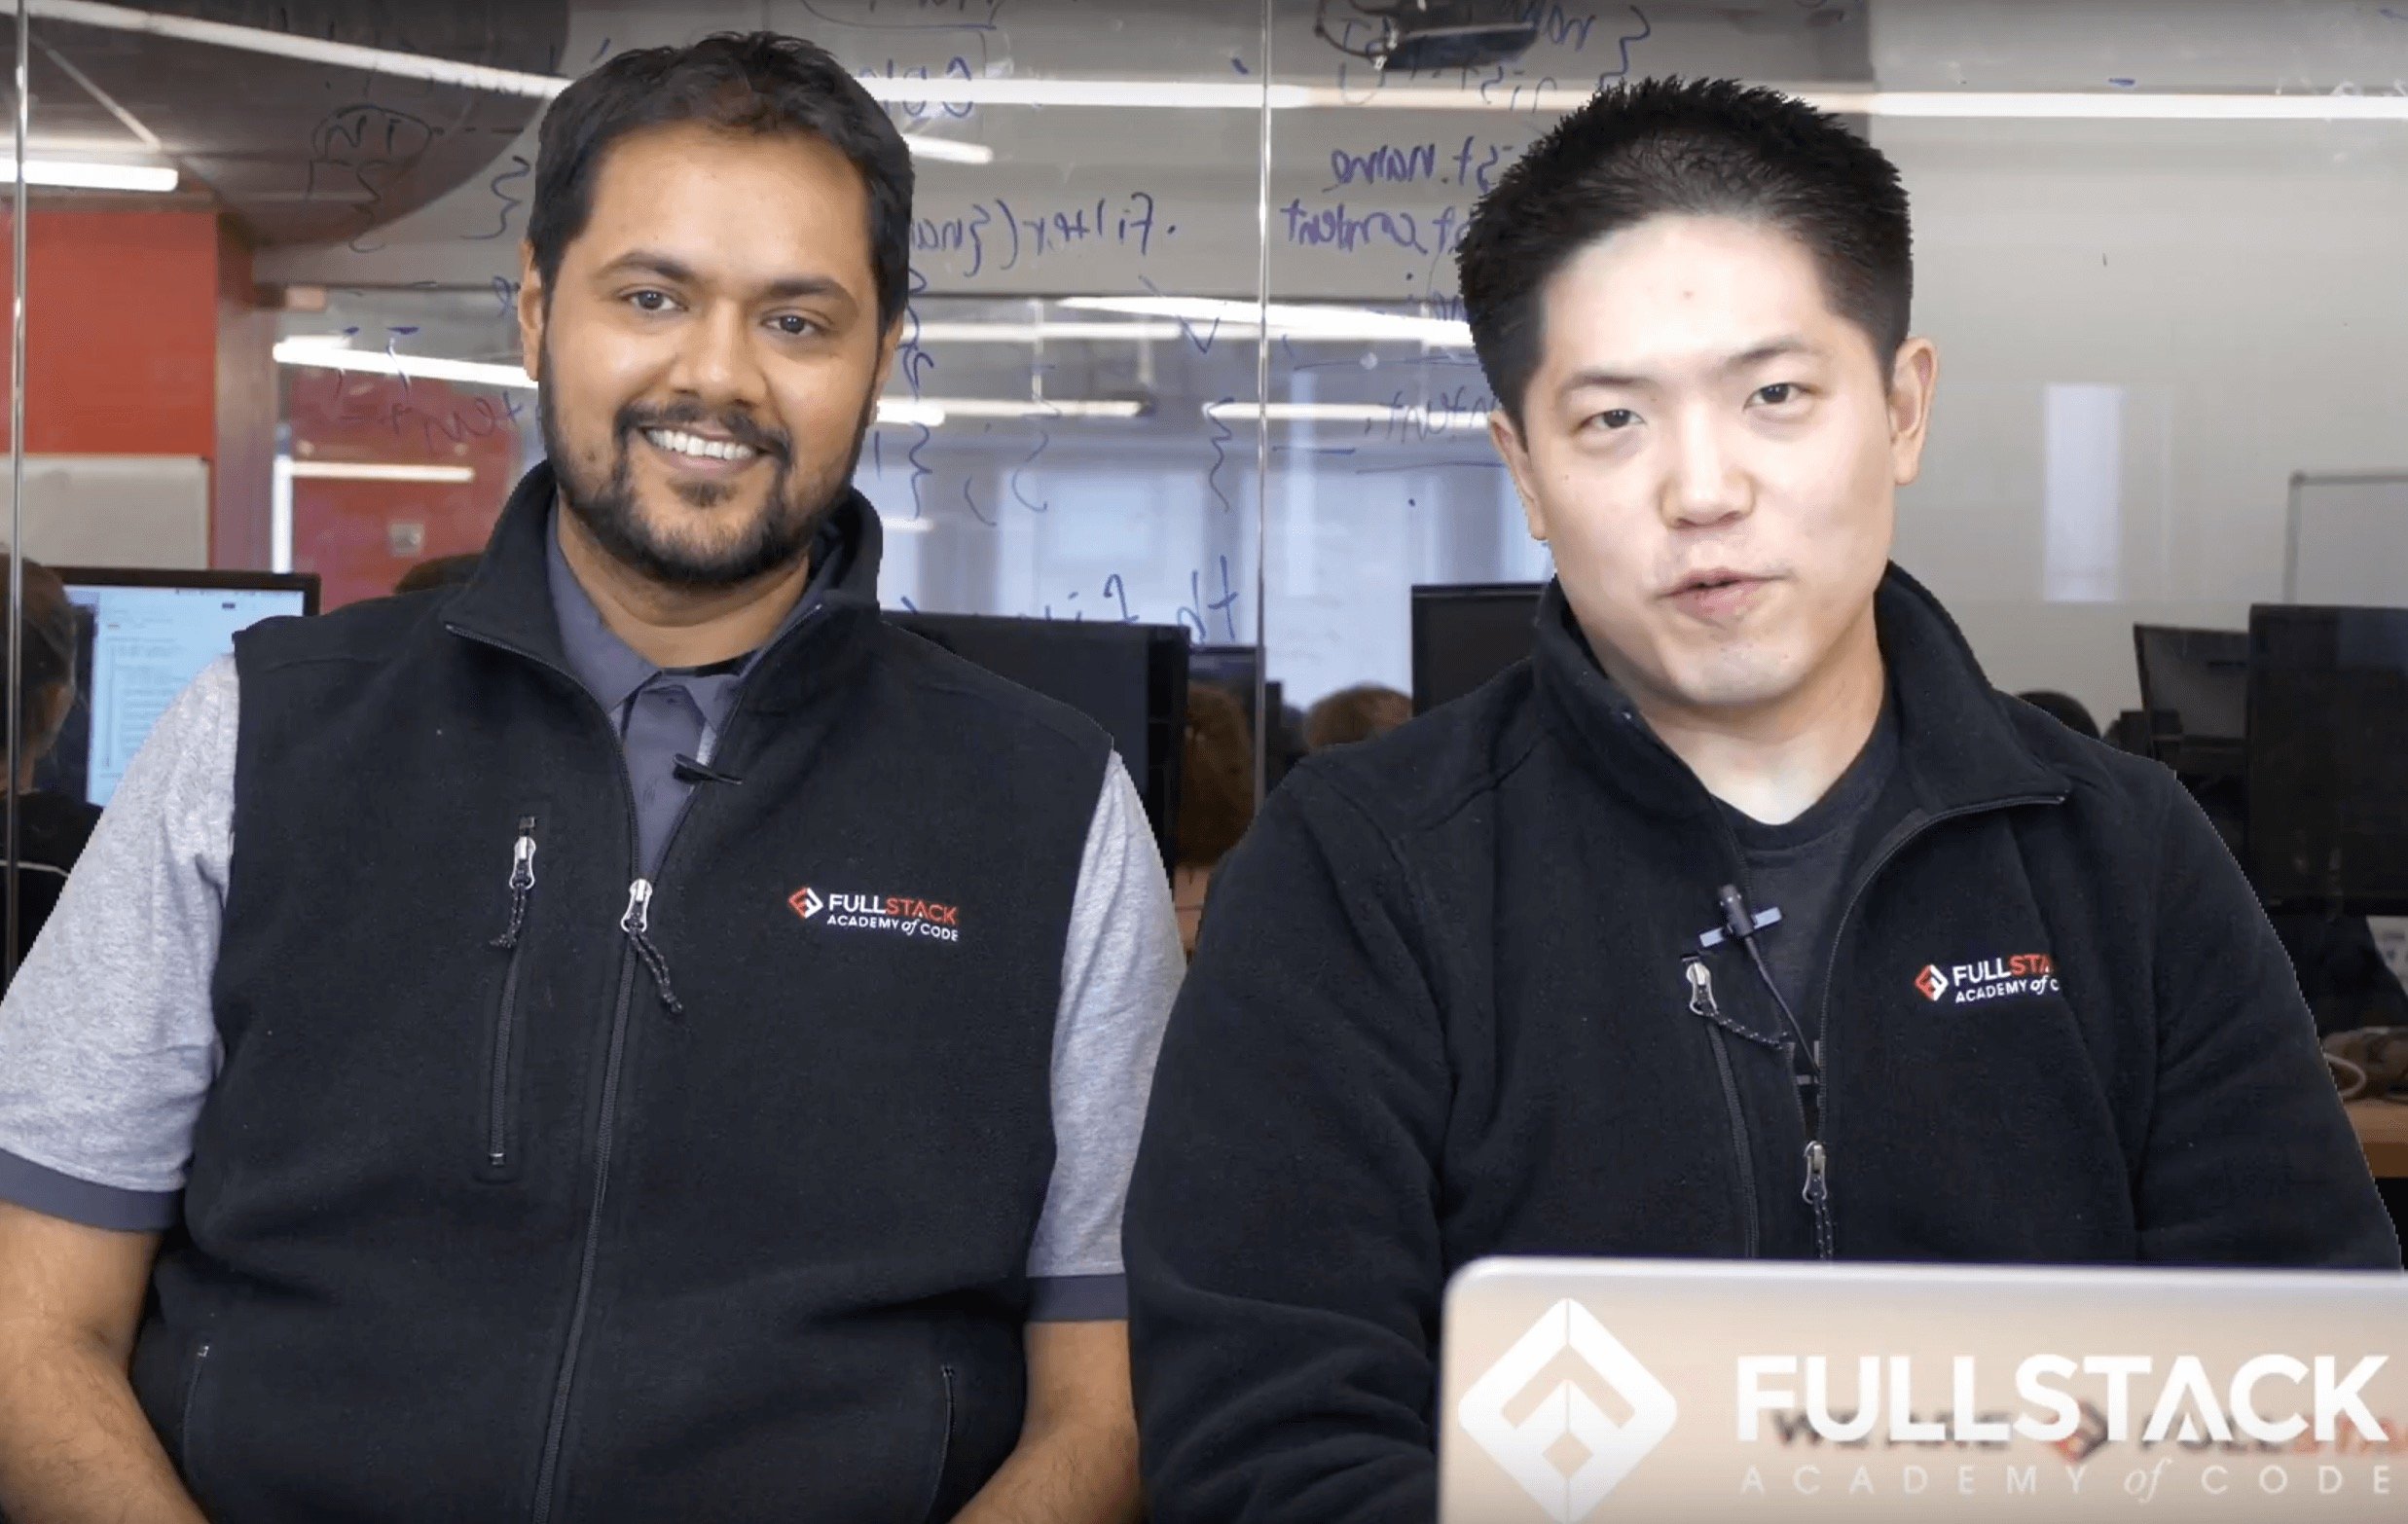 David and Nimit, Fulllstack Academy founders, teaching Bootcamp Prep Online